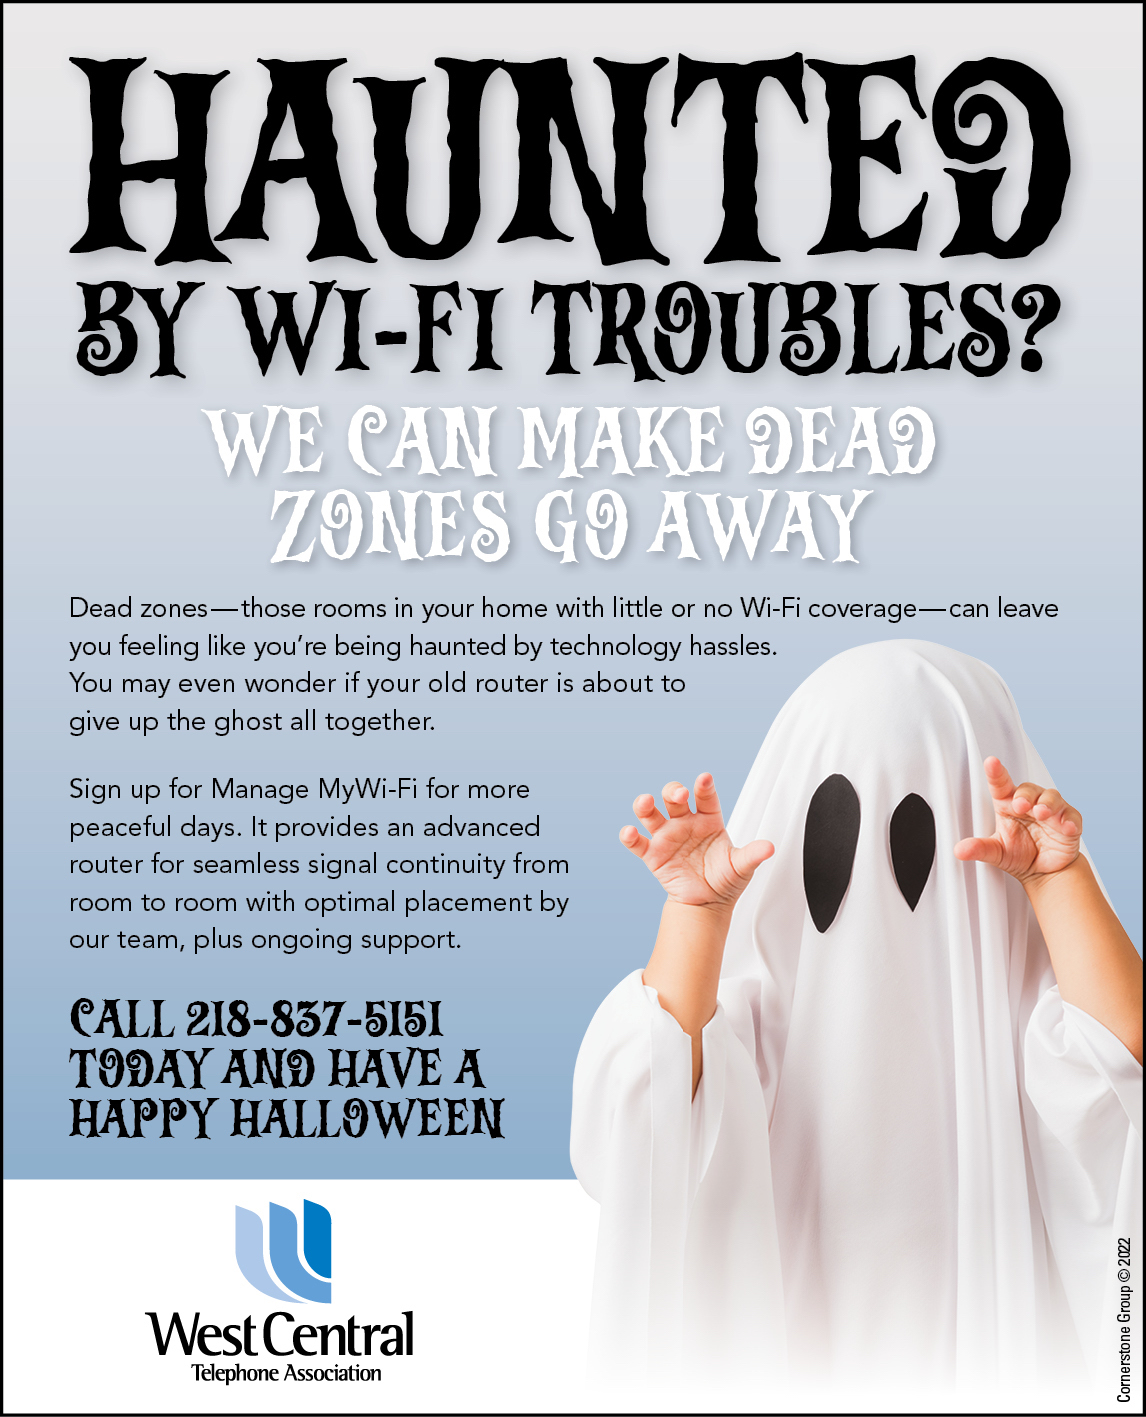 Haunted WiFi - Download Images to View